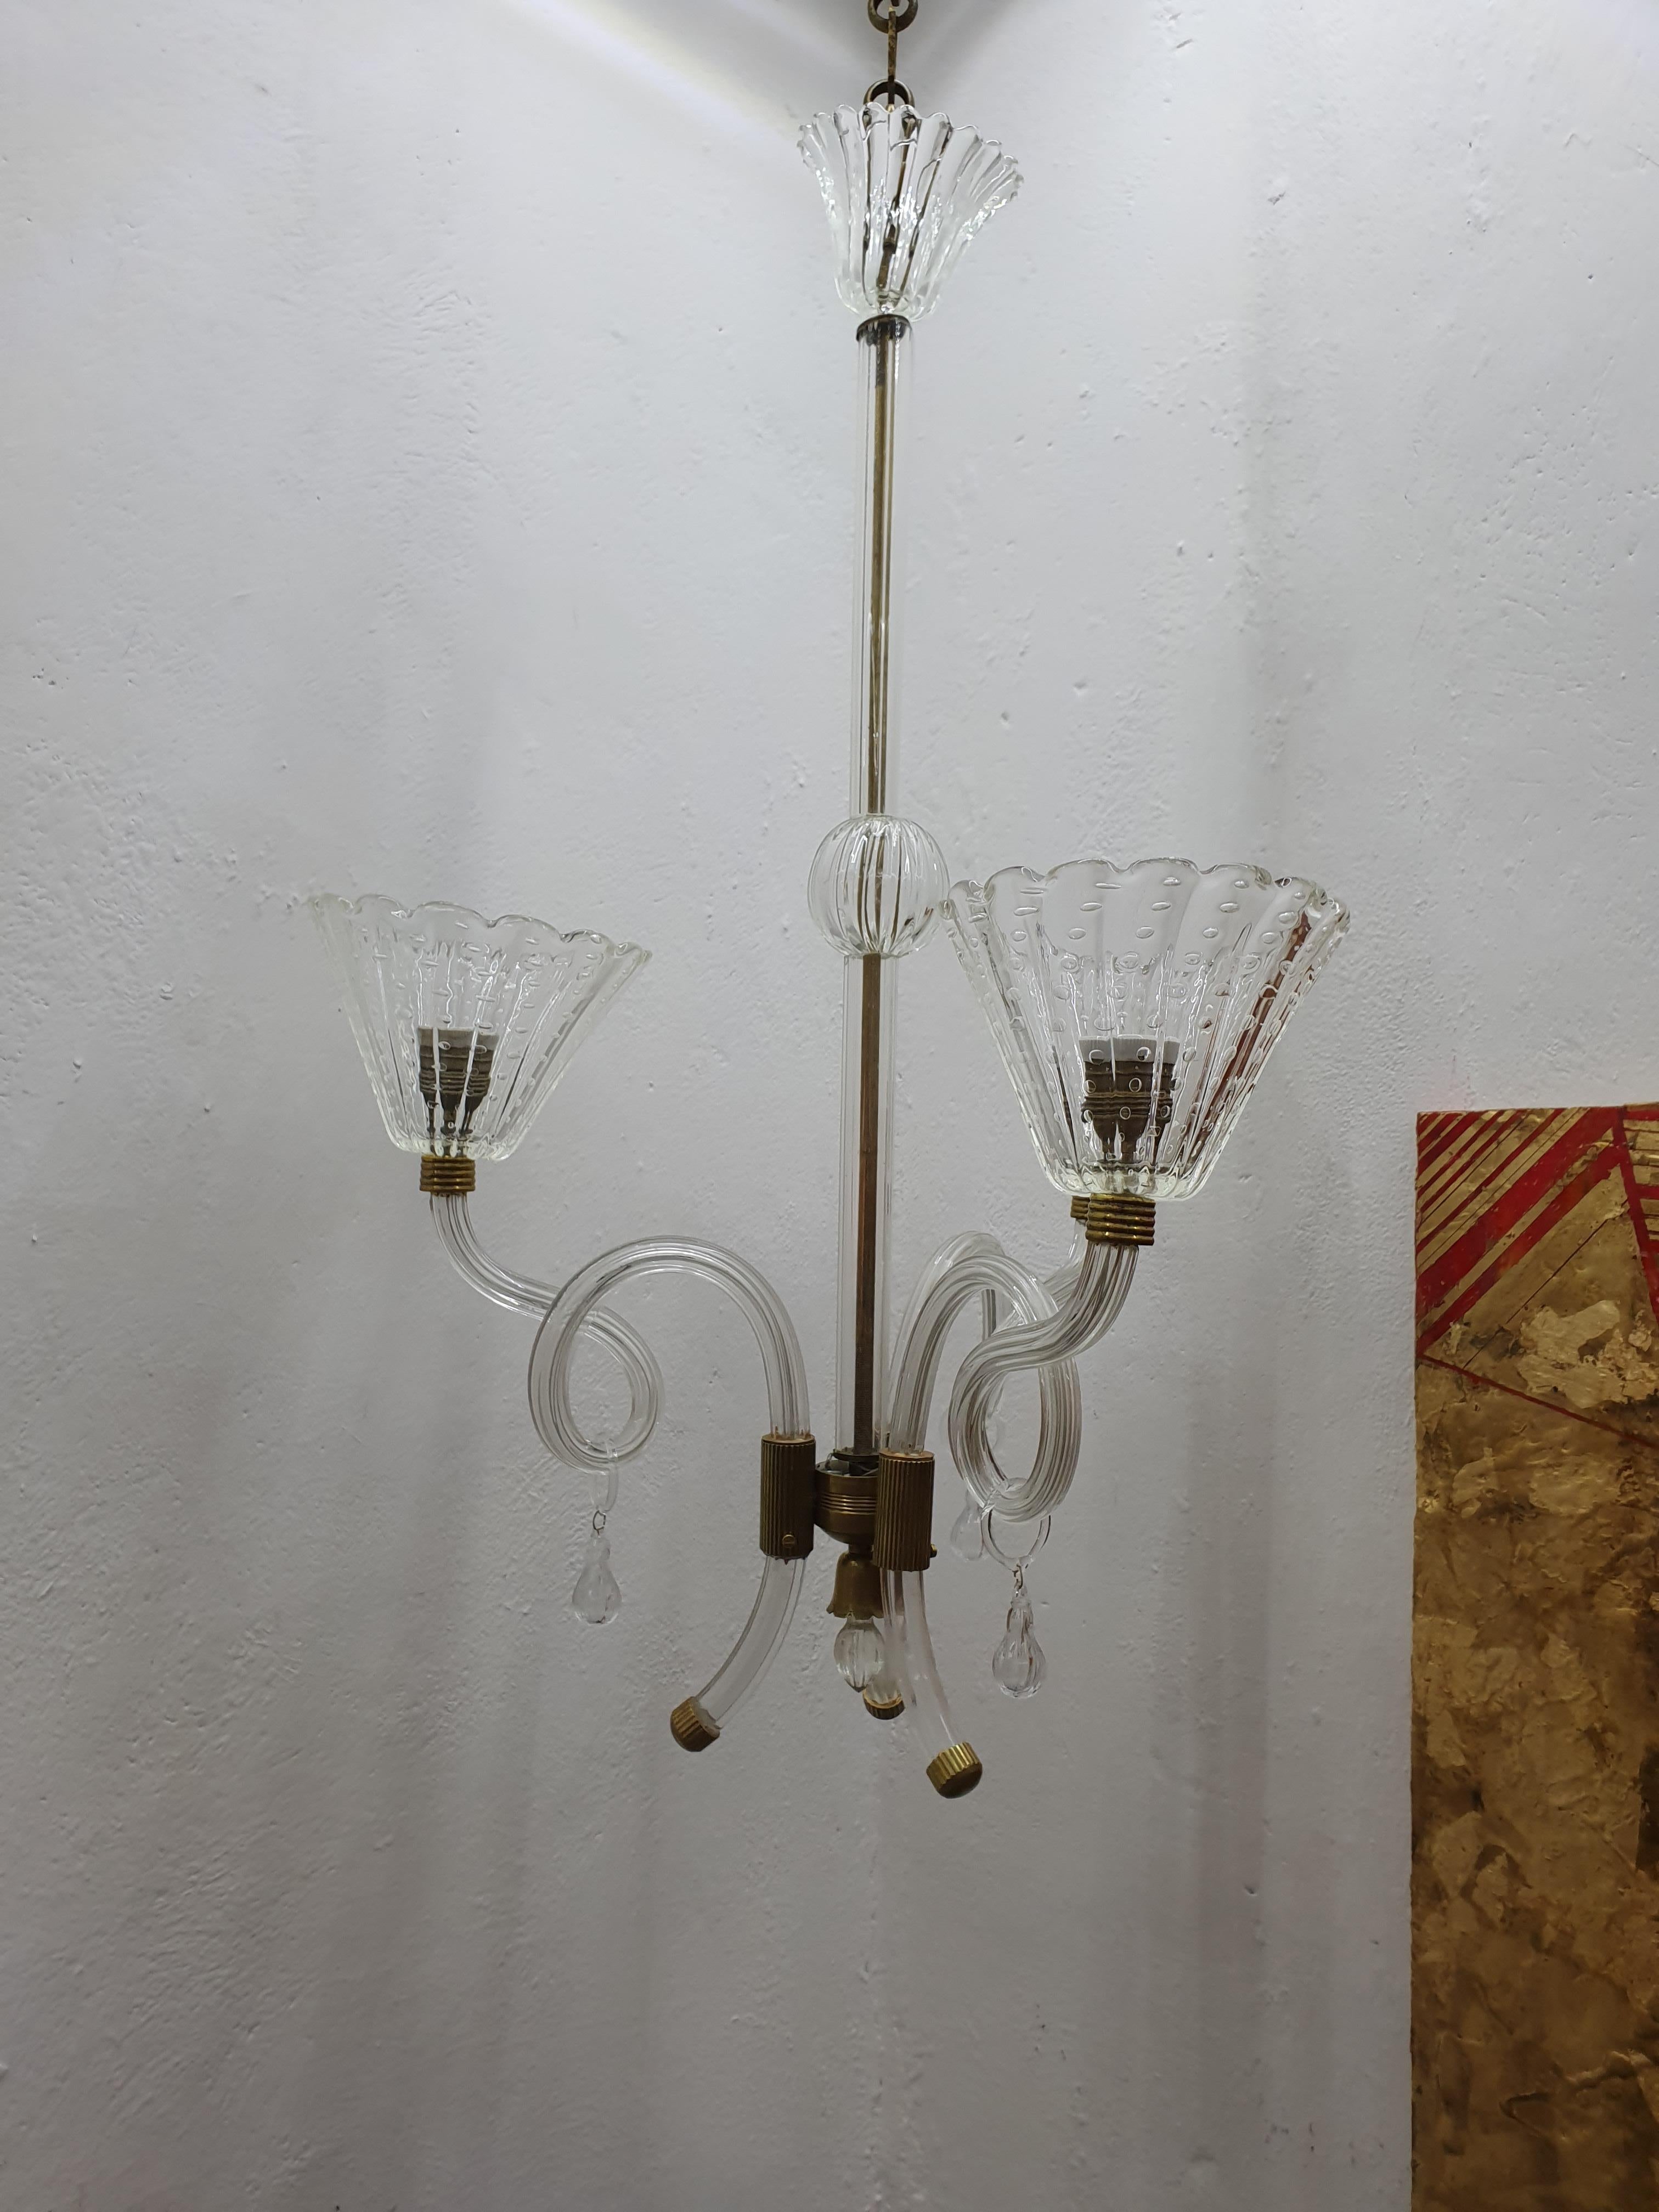 Italian Mid-Century Modern Chandelier by Barovier Toso in Murano Glass, Italy circa 1950 For Sale